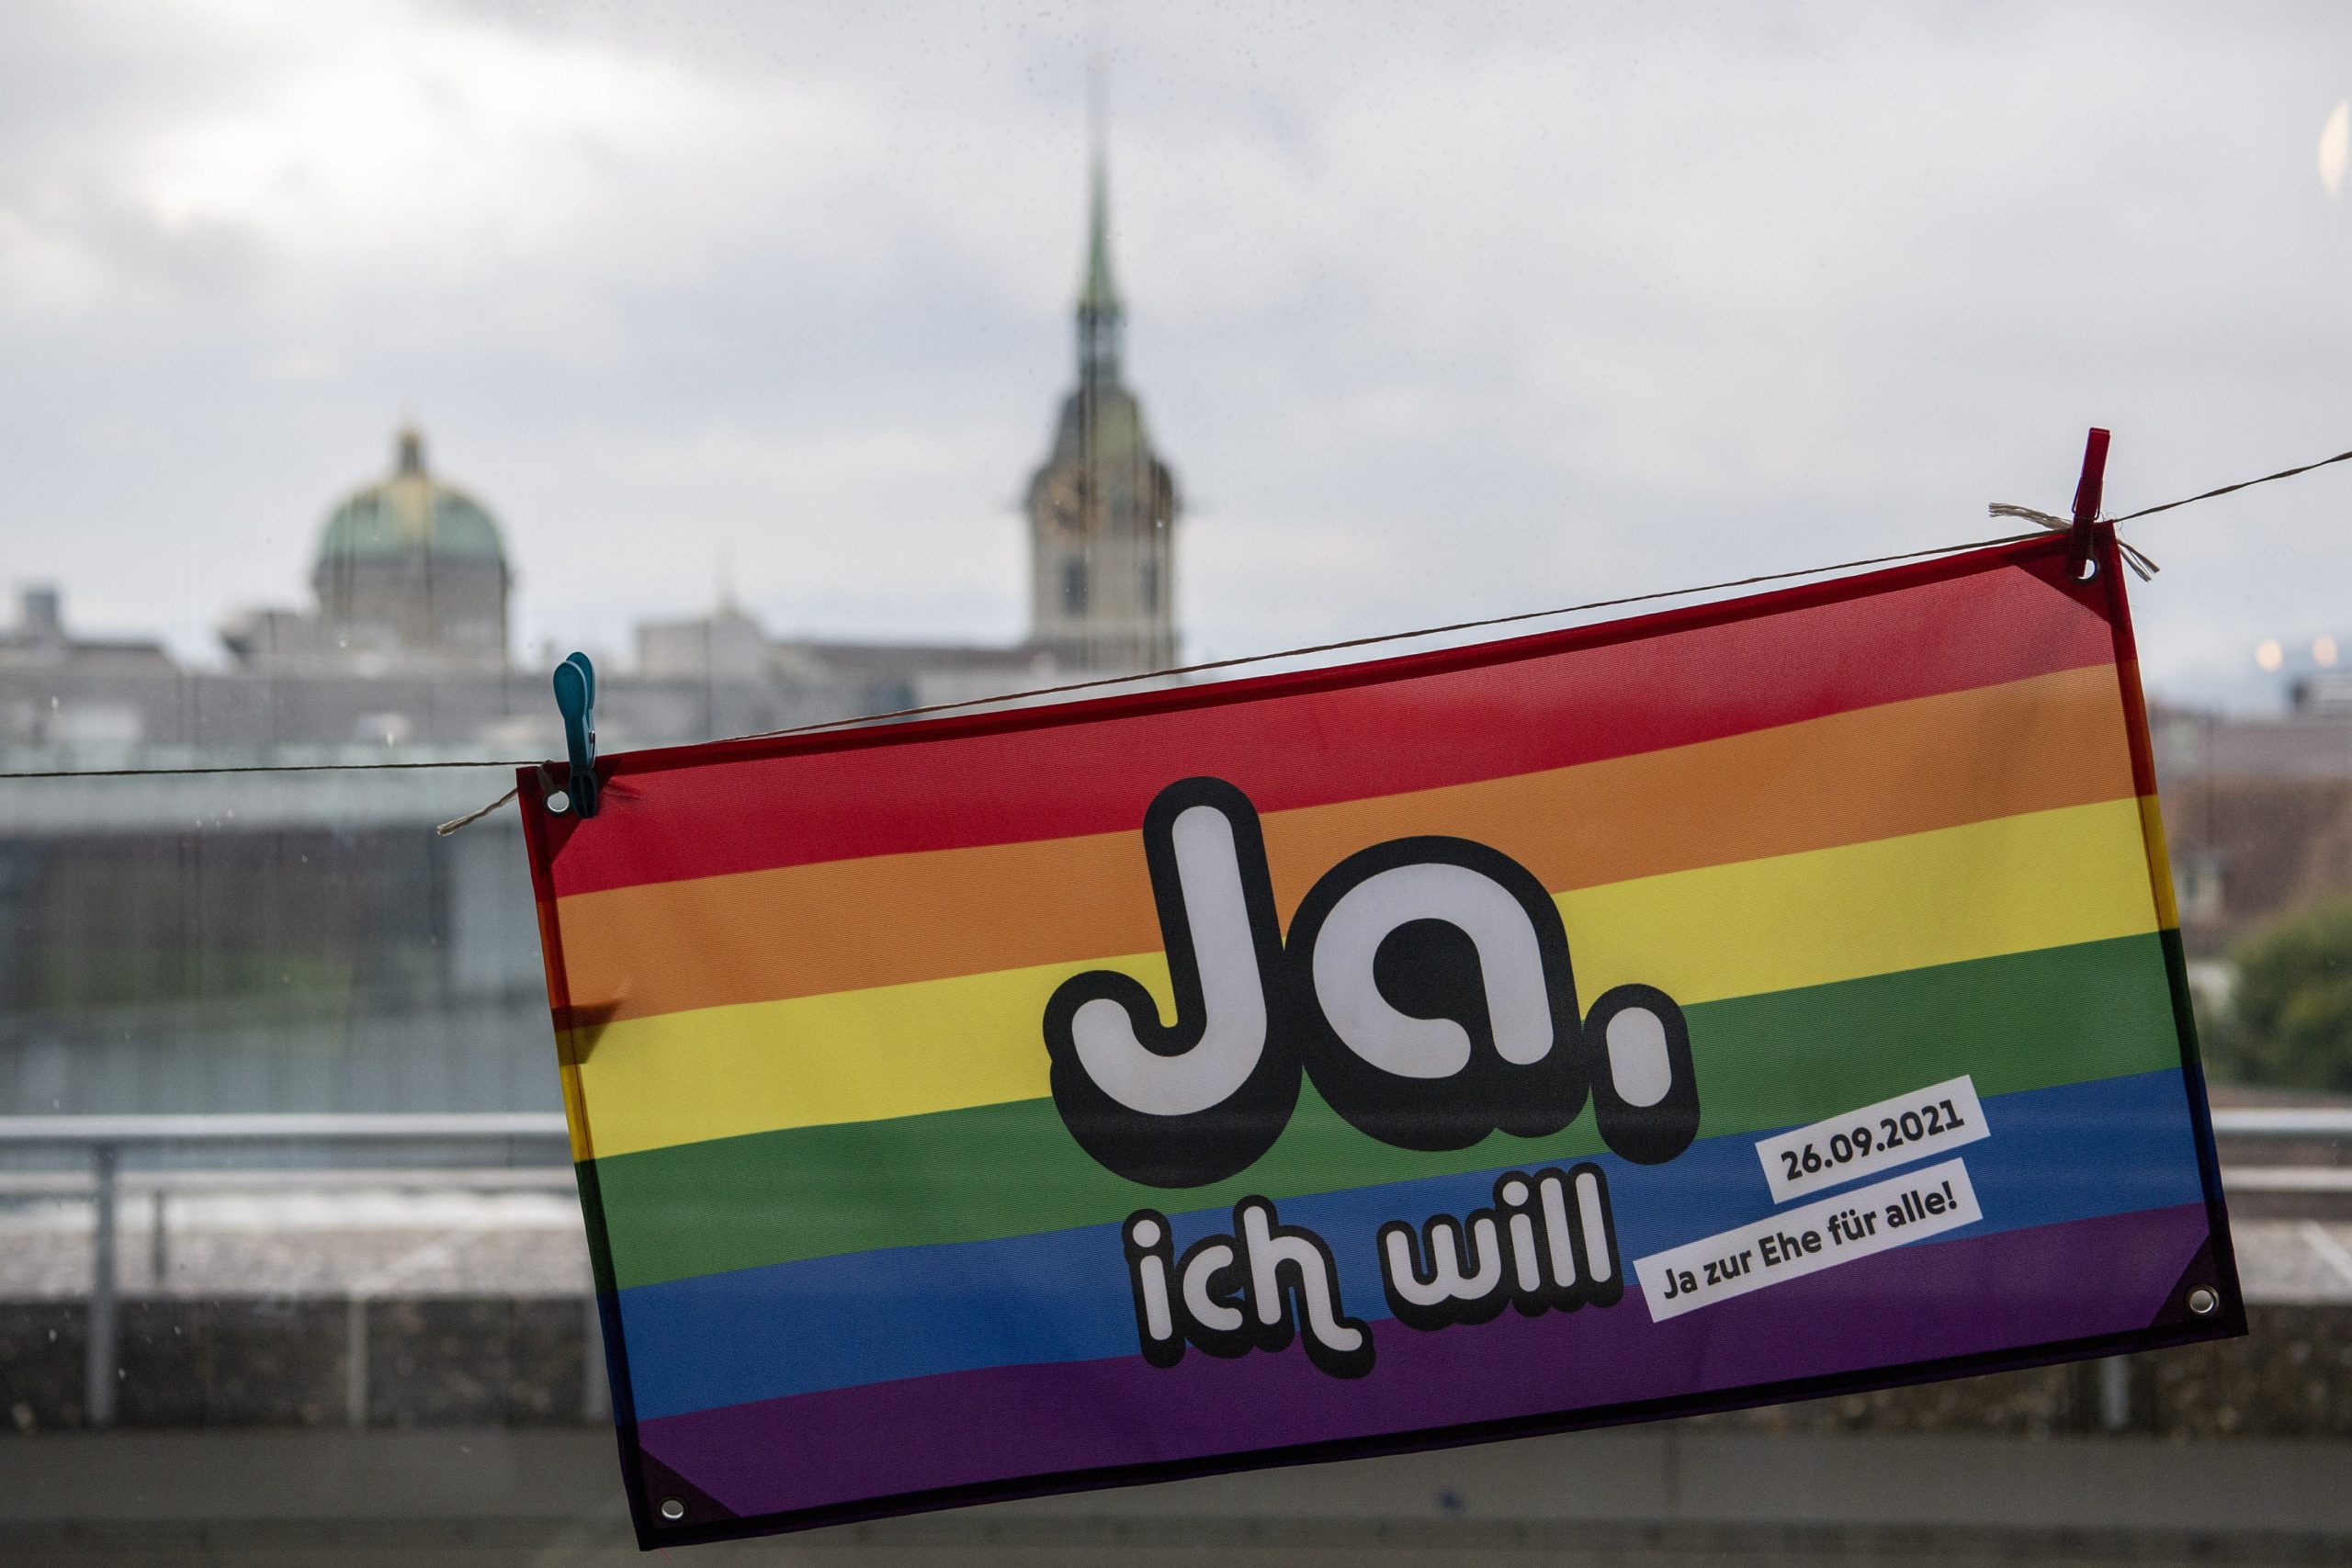 Switzerland has approved same-sex marriage – which other countries are yet to do so?